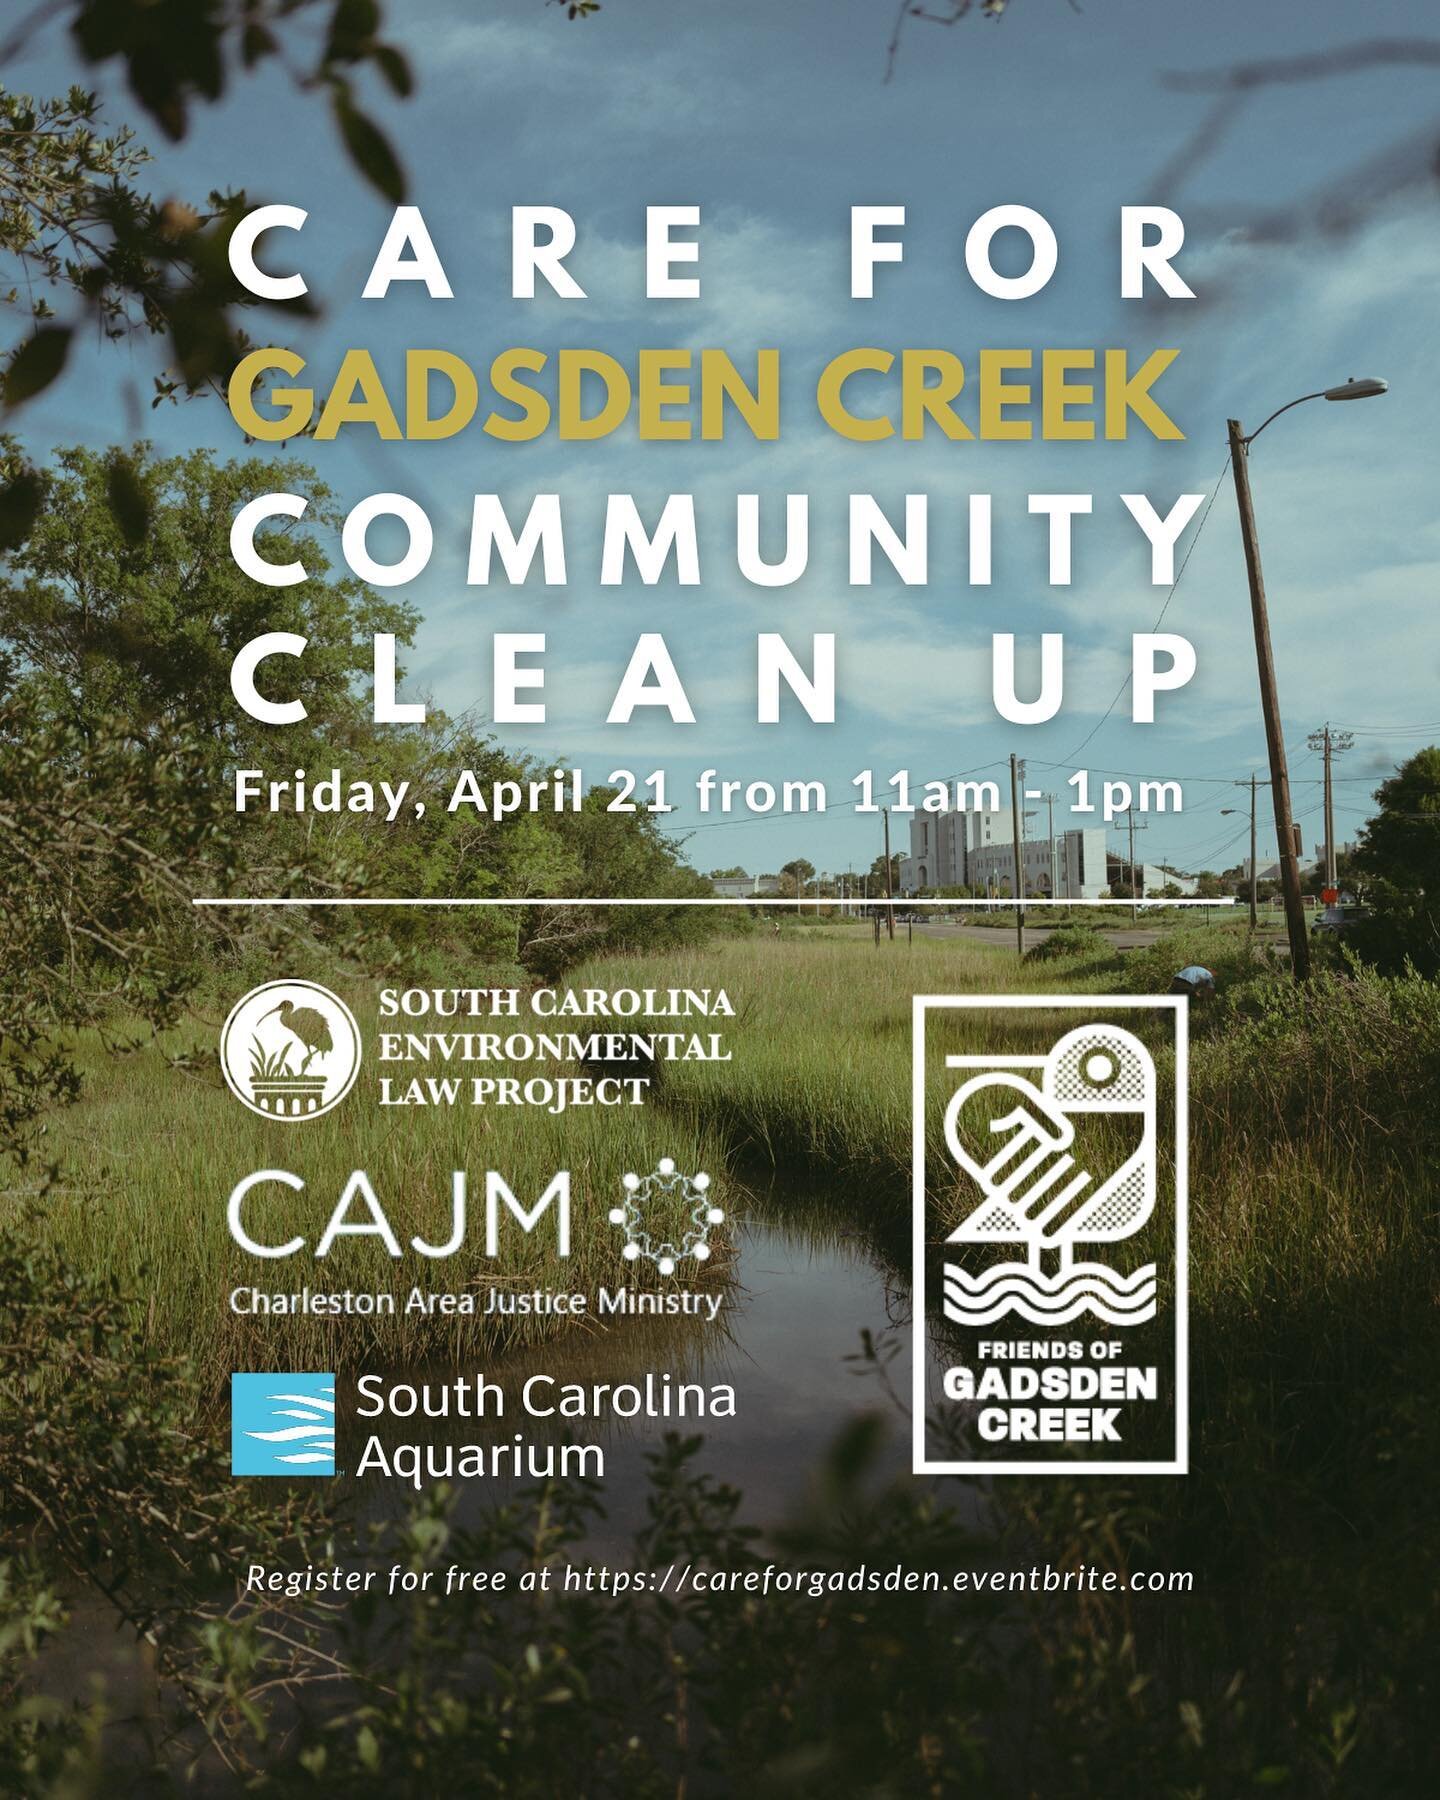 Community clean up‼️Please come out and join FOGC, SCELP, CAJM, and the SC Aquarium for a community clean up of Gadsden Creek on April 21st from 11am to 1pm. It will be a fun day filled with community and snacks will be provided! If interested, pleas